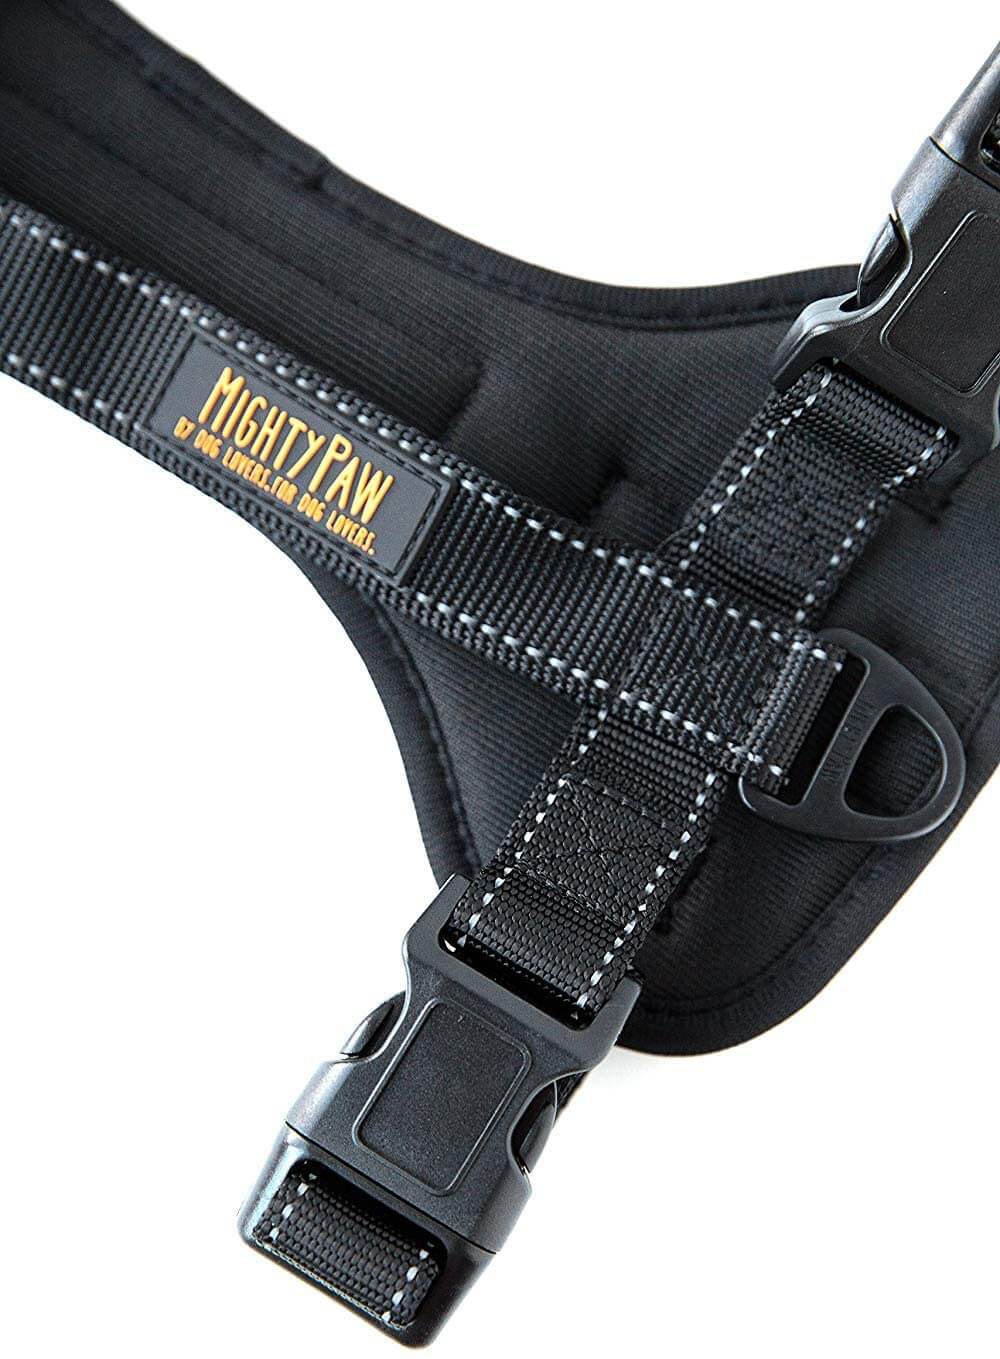 Adjustable Safety Harness for Dogs of All Sizes